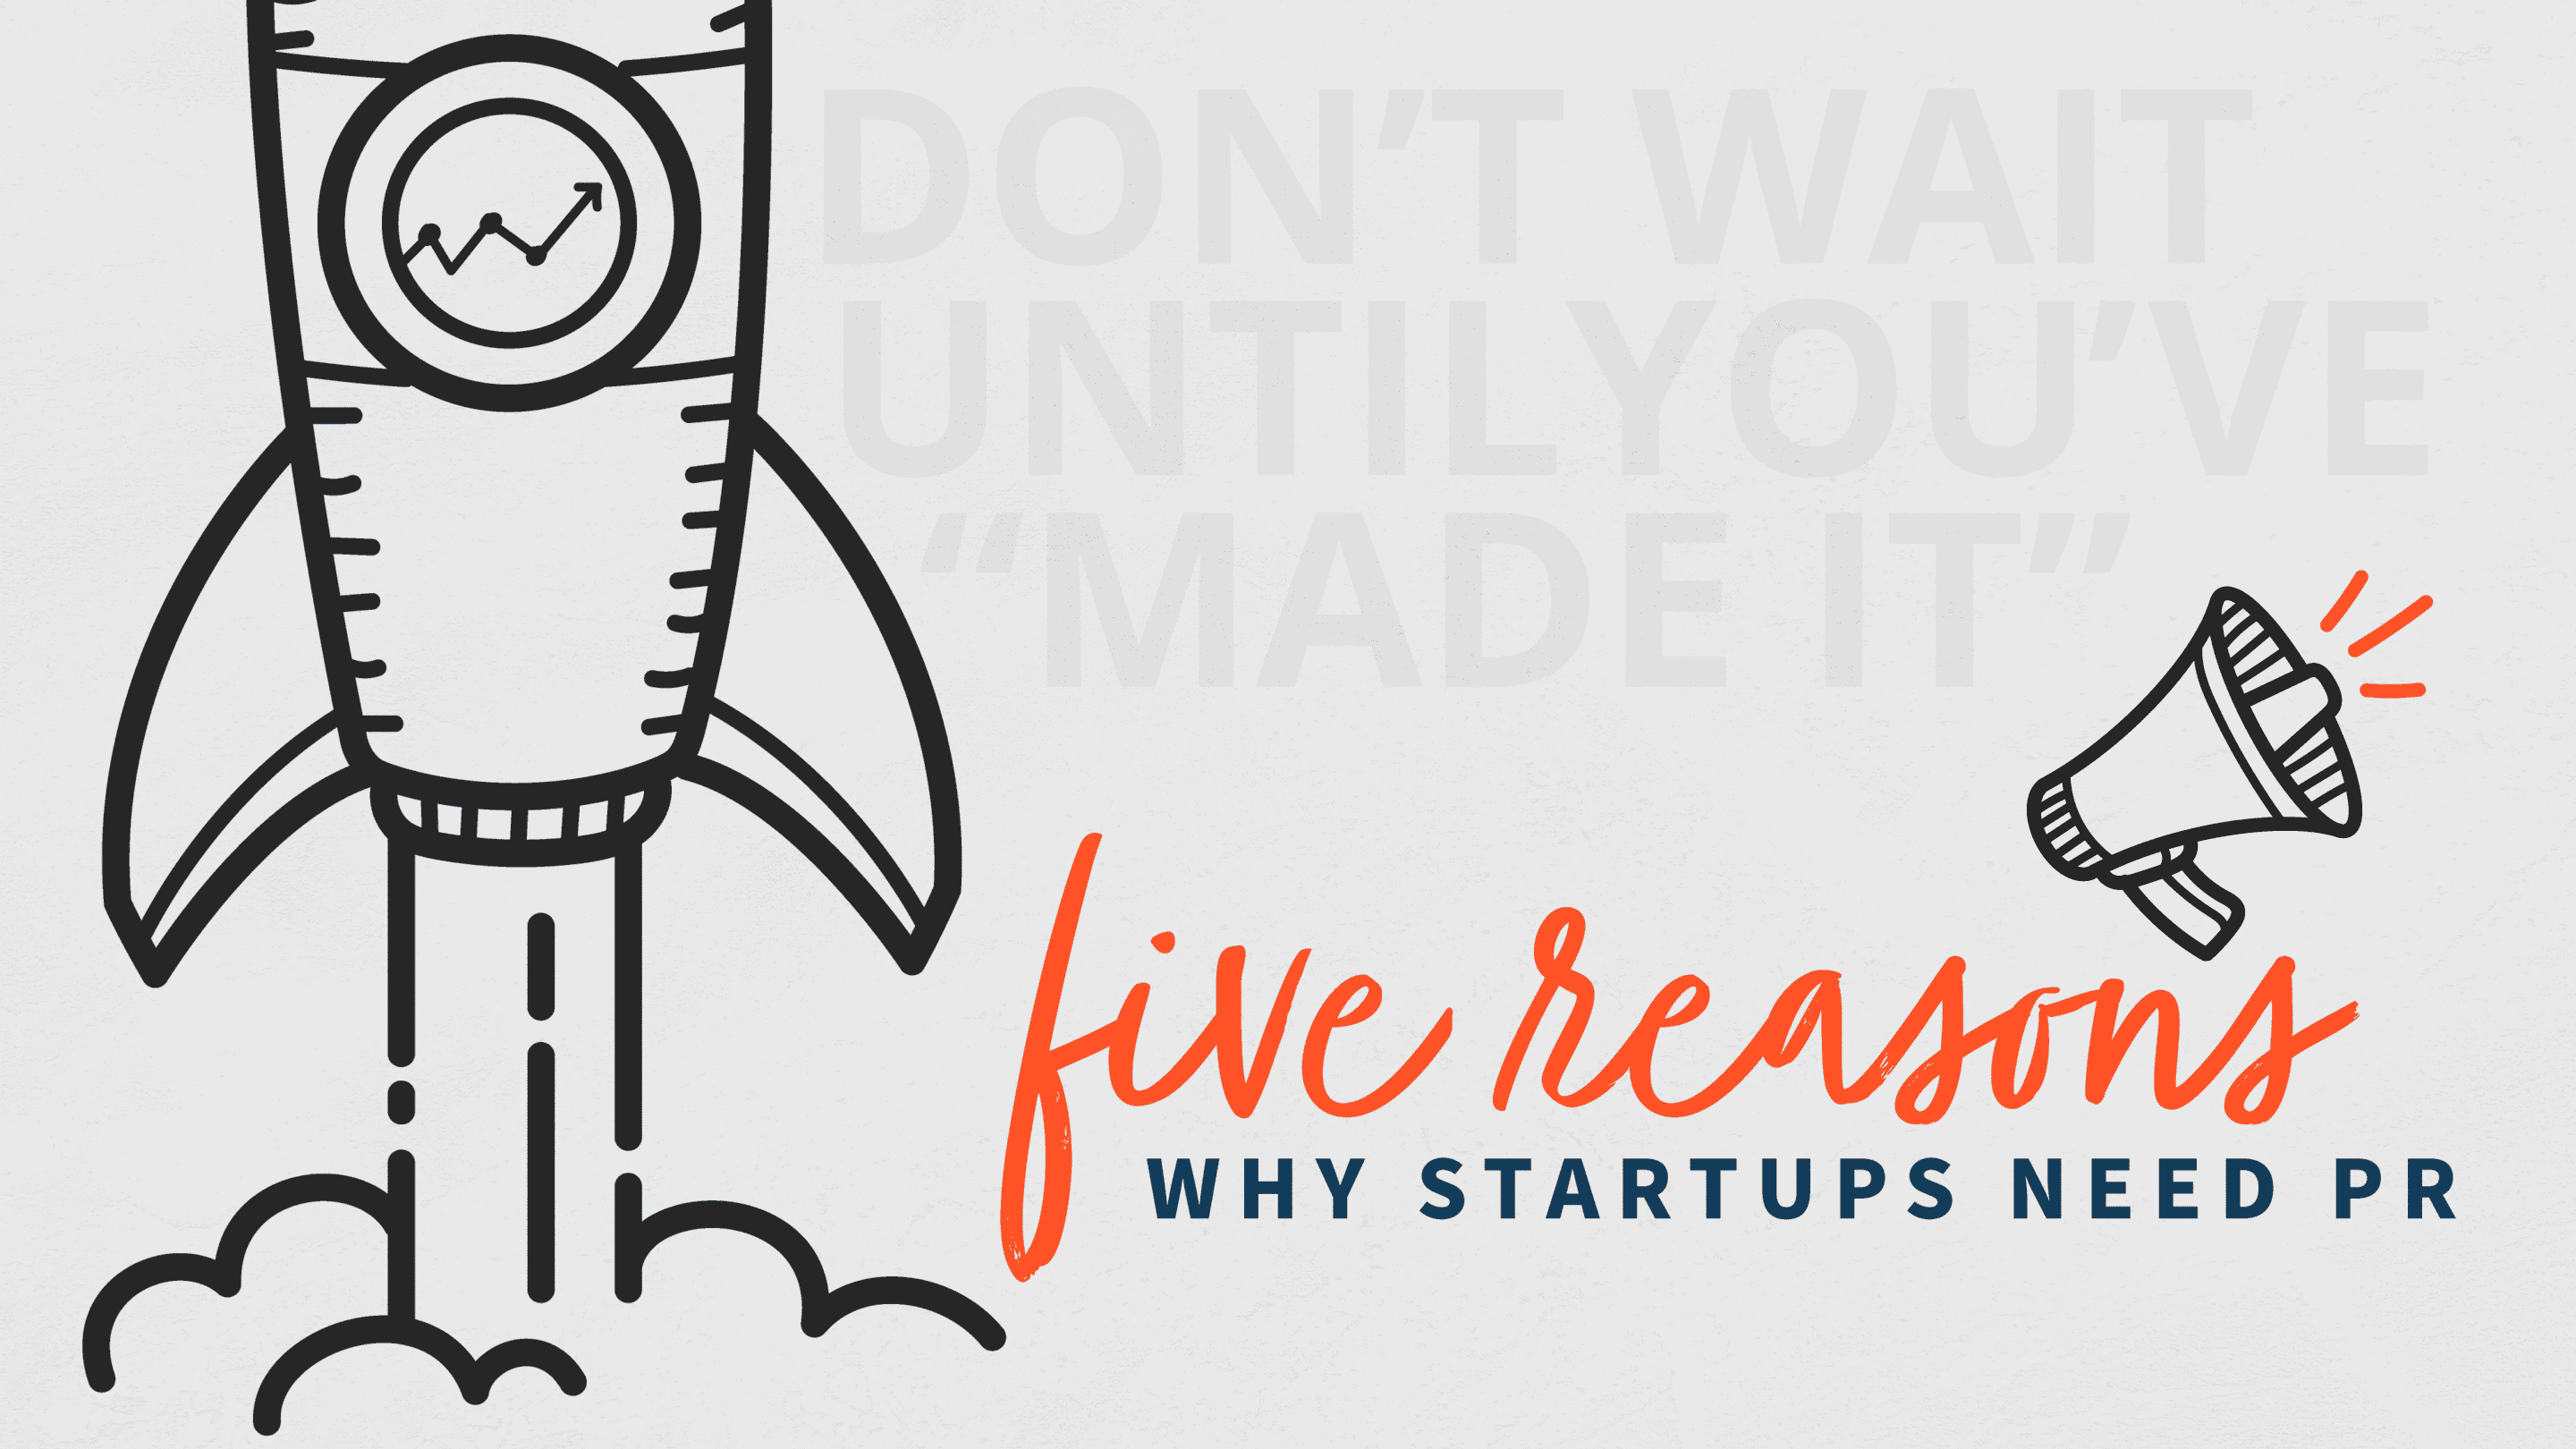 Don’t wait until you’ve “made it”: Five reasons why startups need PR